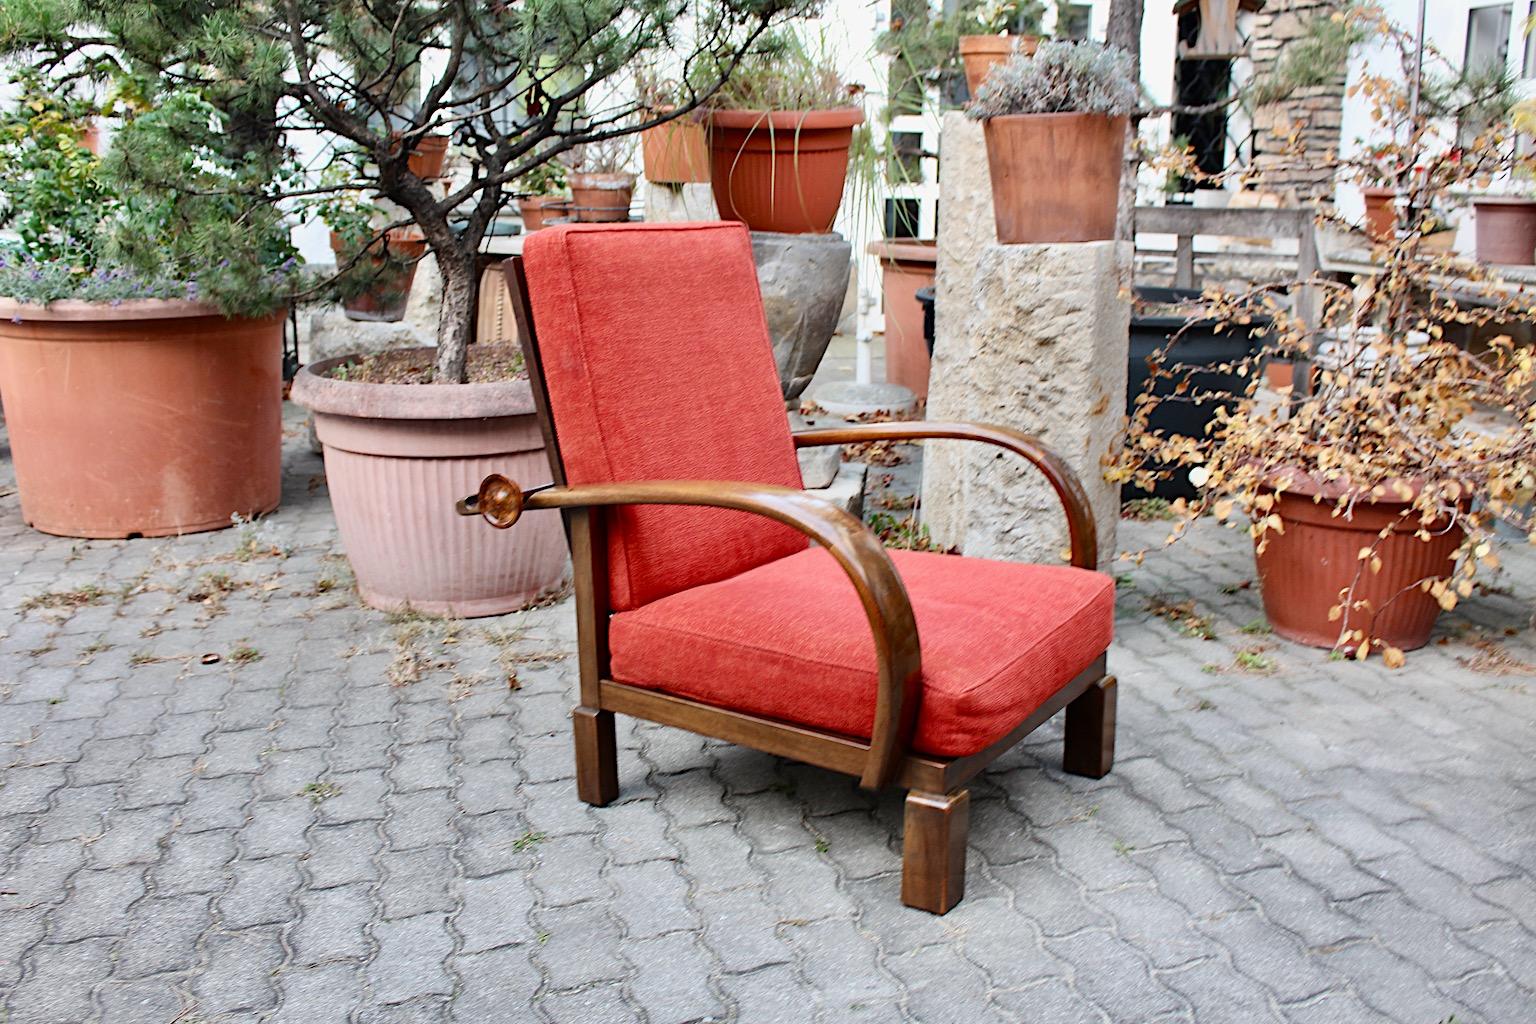 Art Deco vintage lounge chair model Kanadier from walnut with loose cushions for back and seat in coral burnt orange color, circa 1925 Austria.
While the chair frame from walnut shows smooth brown color, the upholstery features loose cushions and